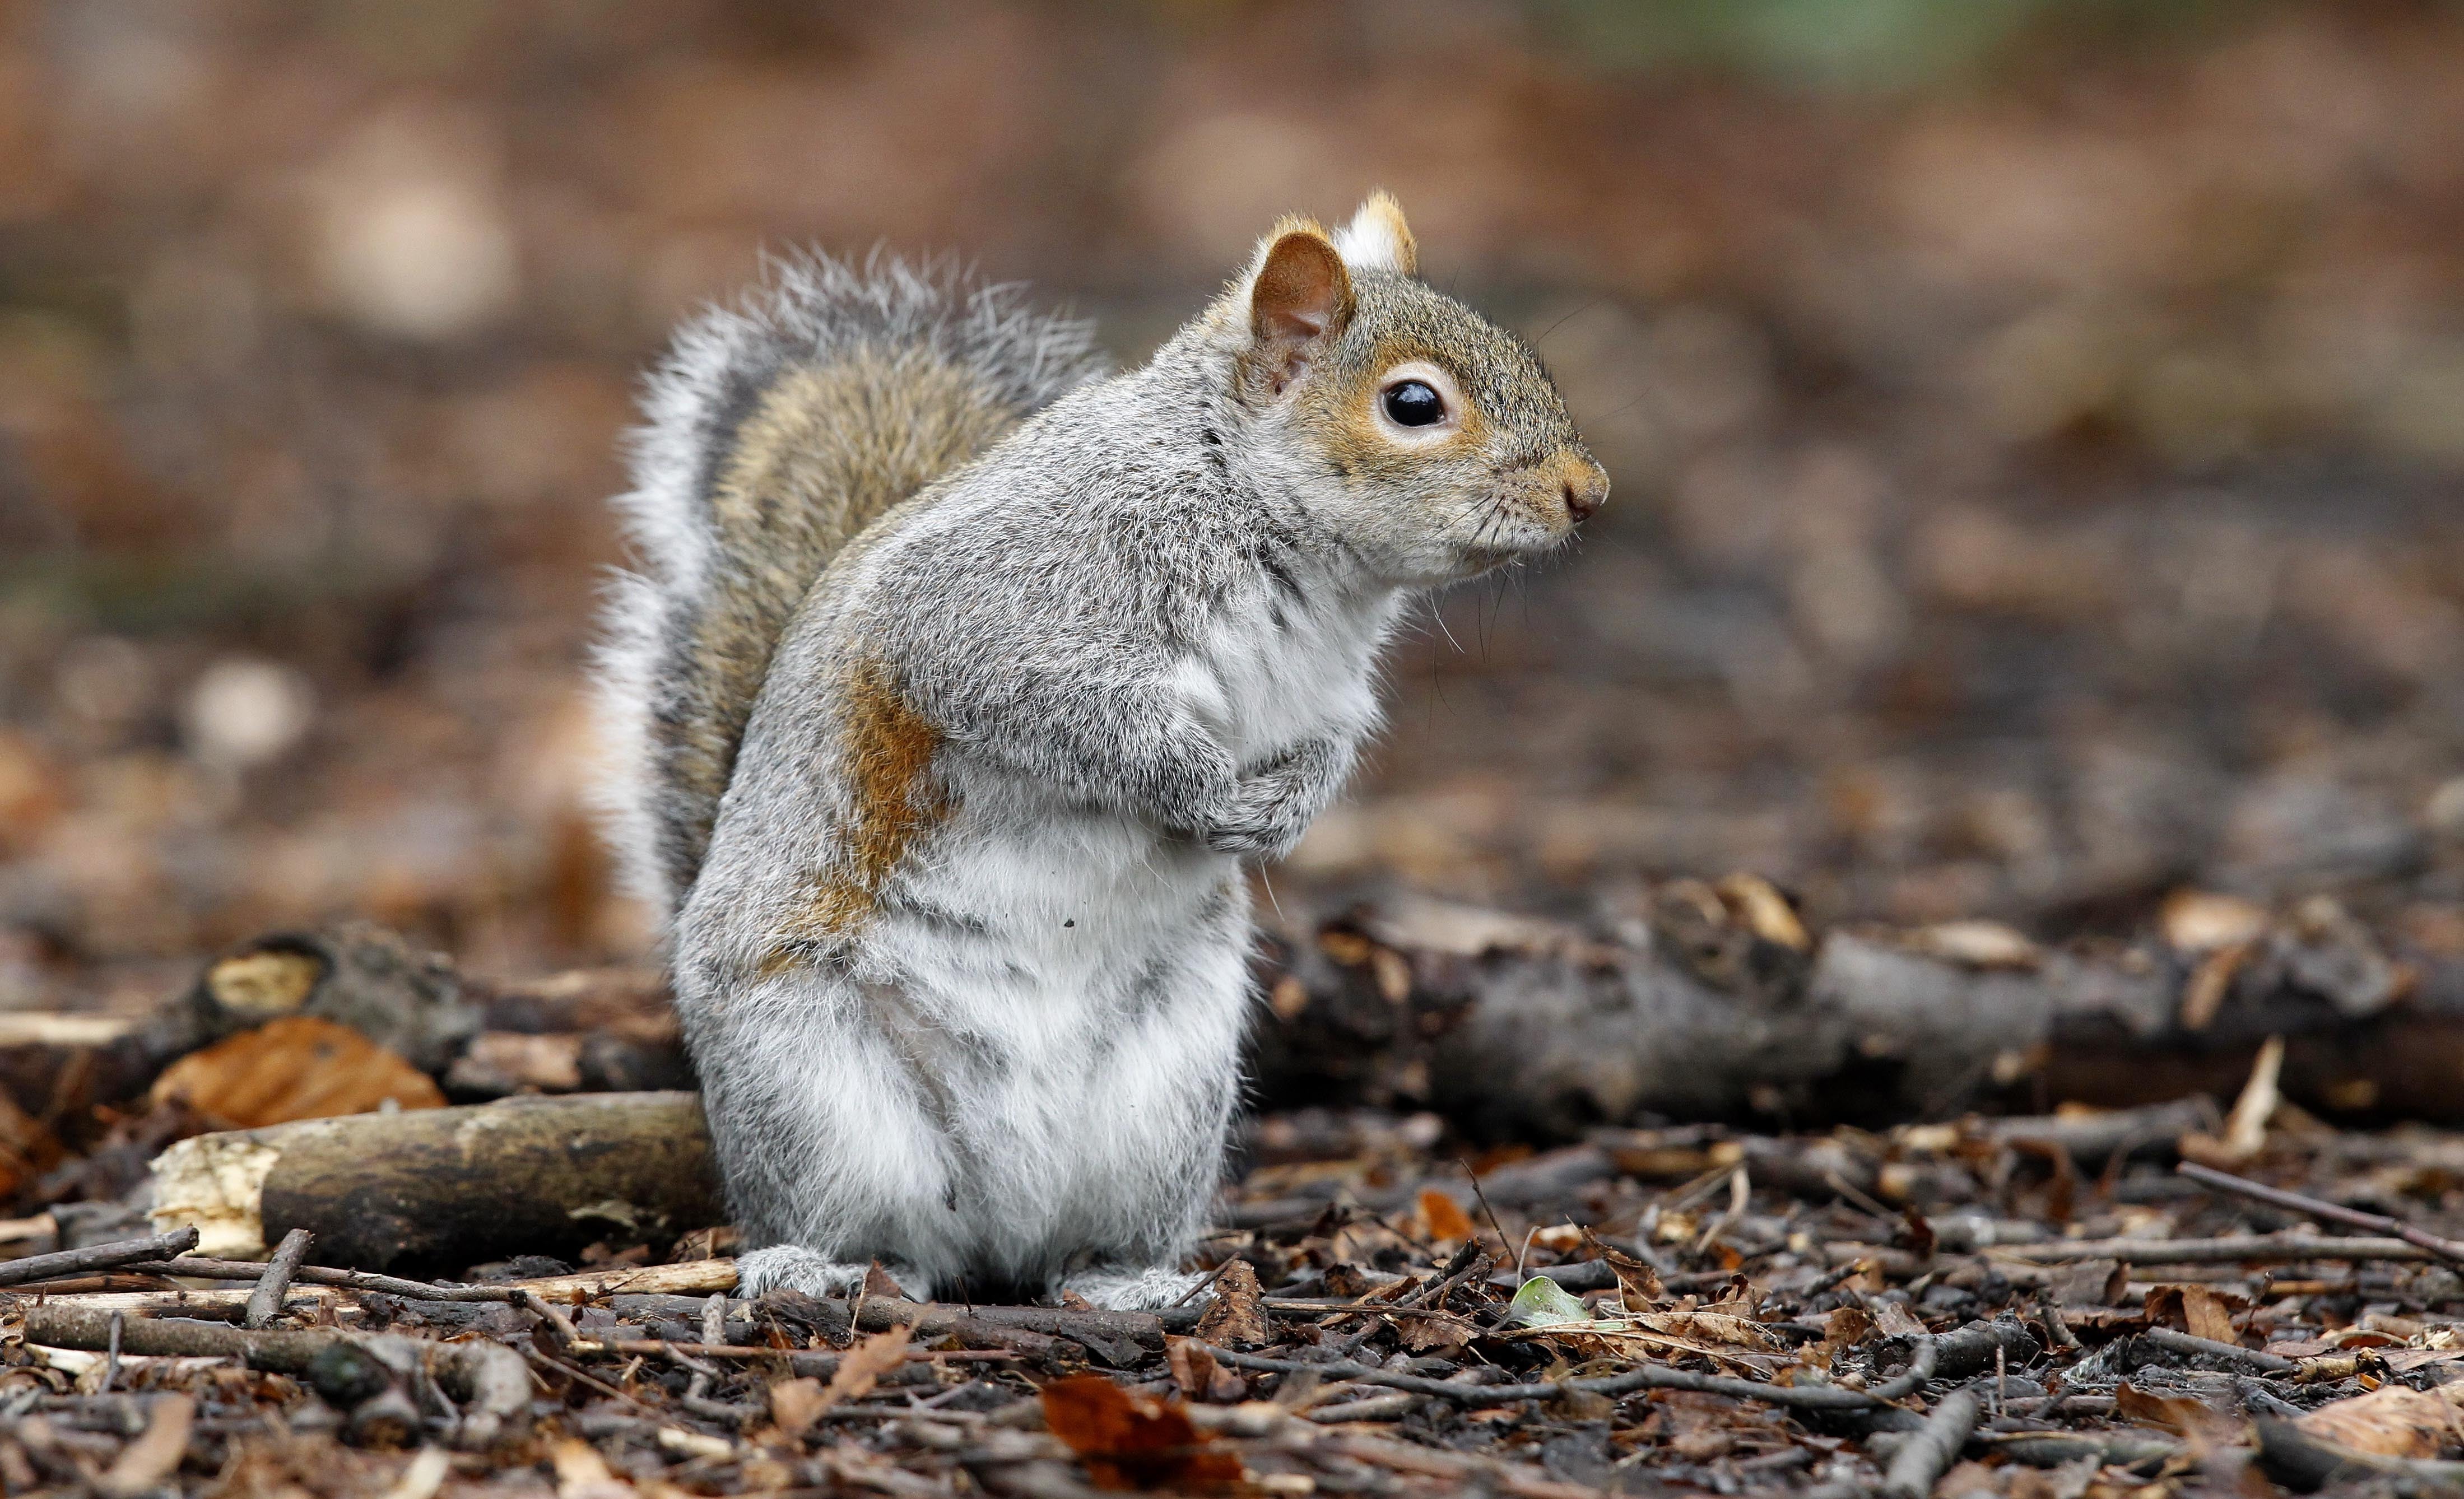 Research is looking into fertility control for grey squirrels (Peter Byrne/PA)